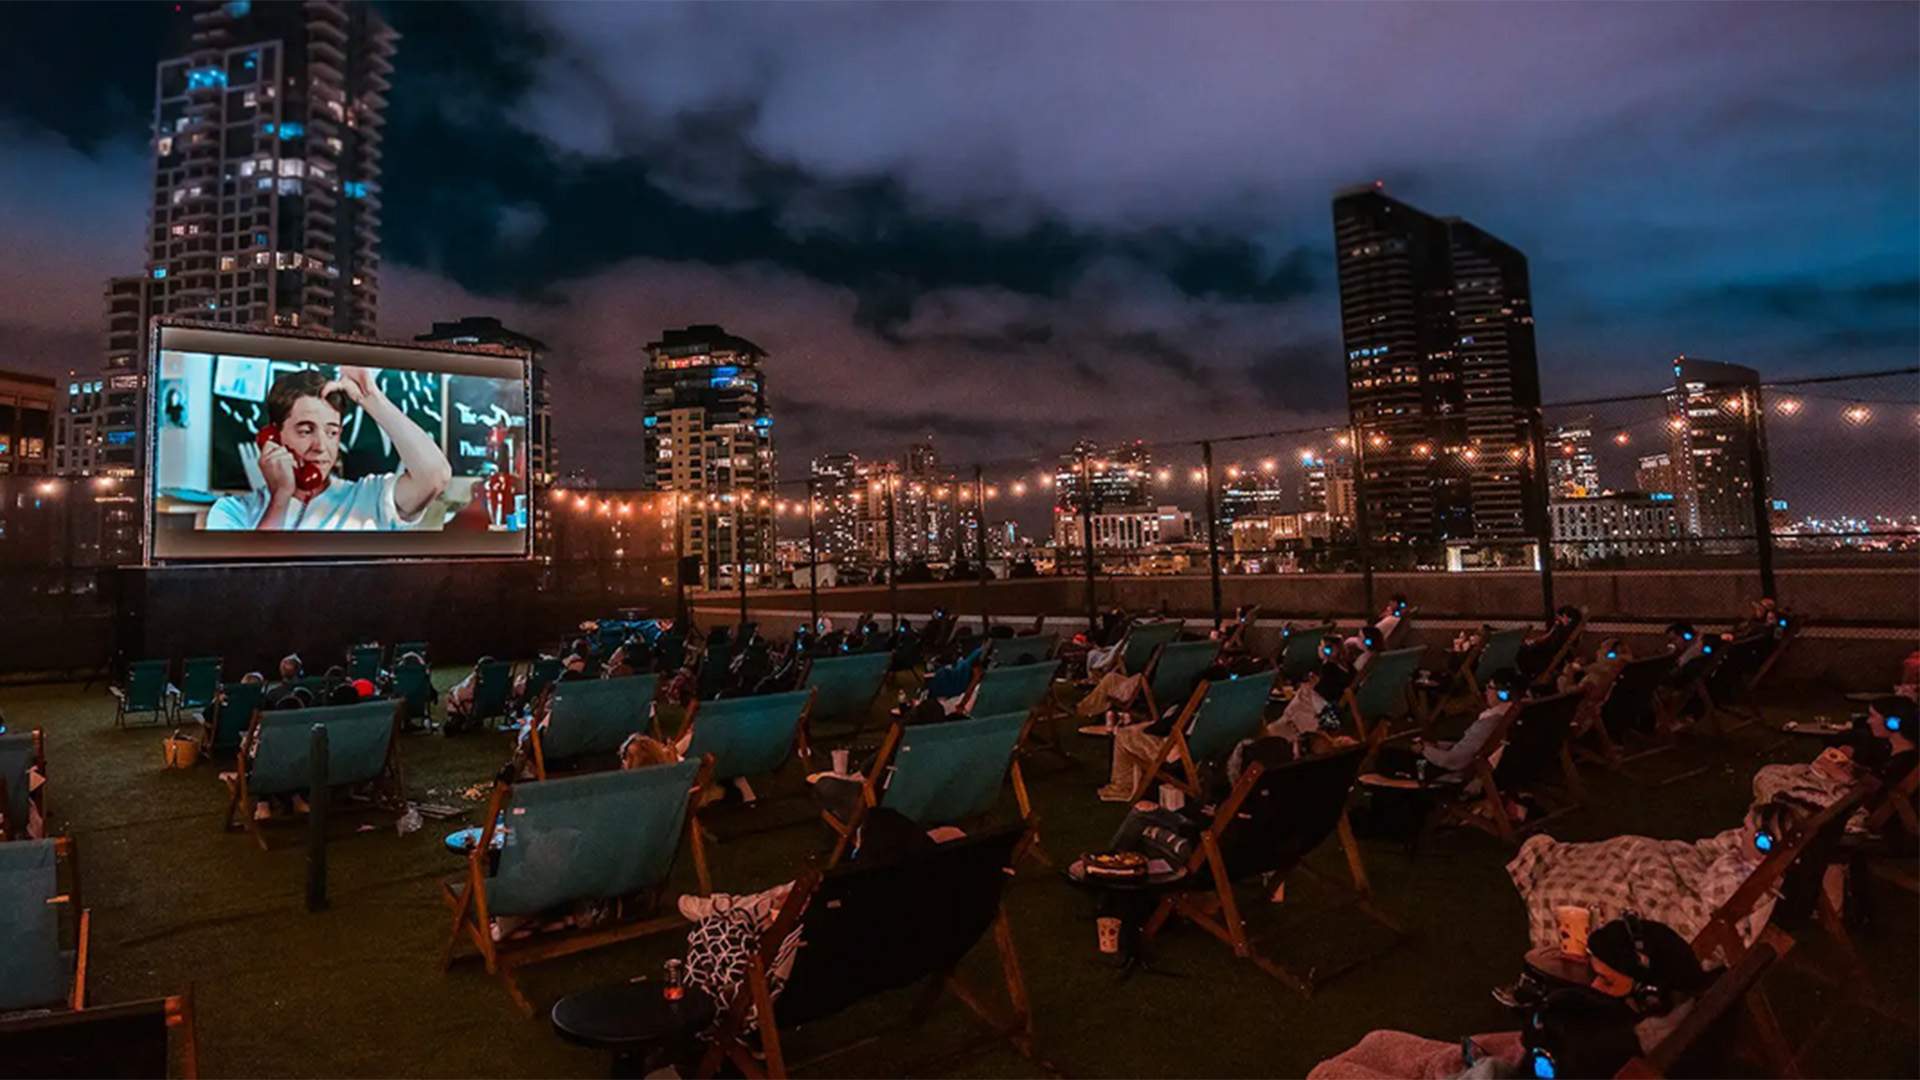 A Free 24-Hour Outdoor Cinema Playing Studio Ghibli and Wes Anderson Films Is Popping Up in Sydney